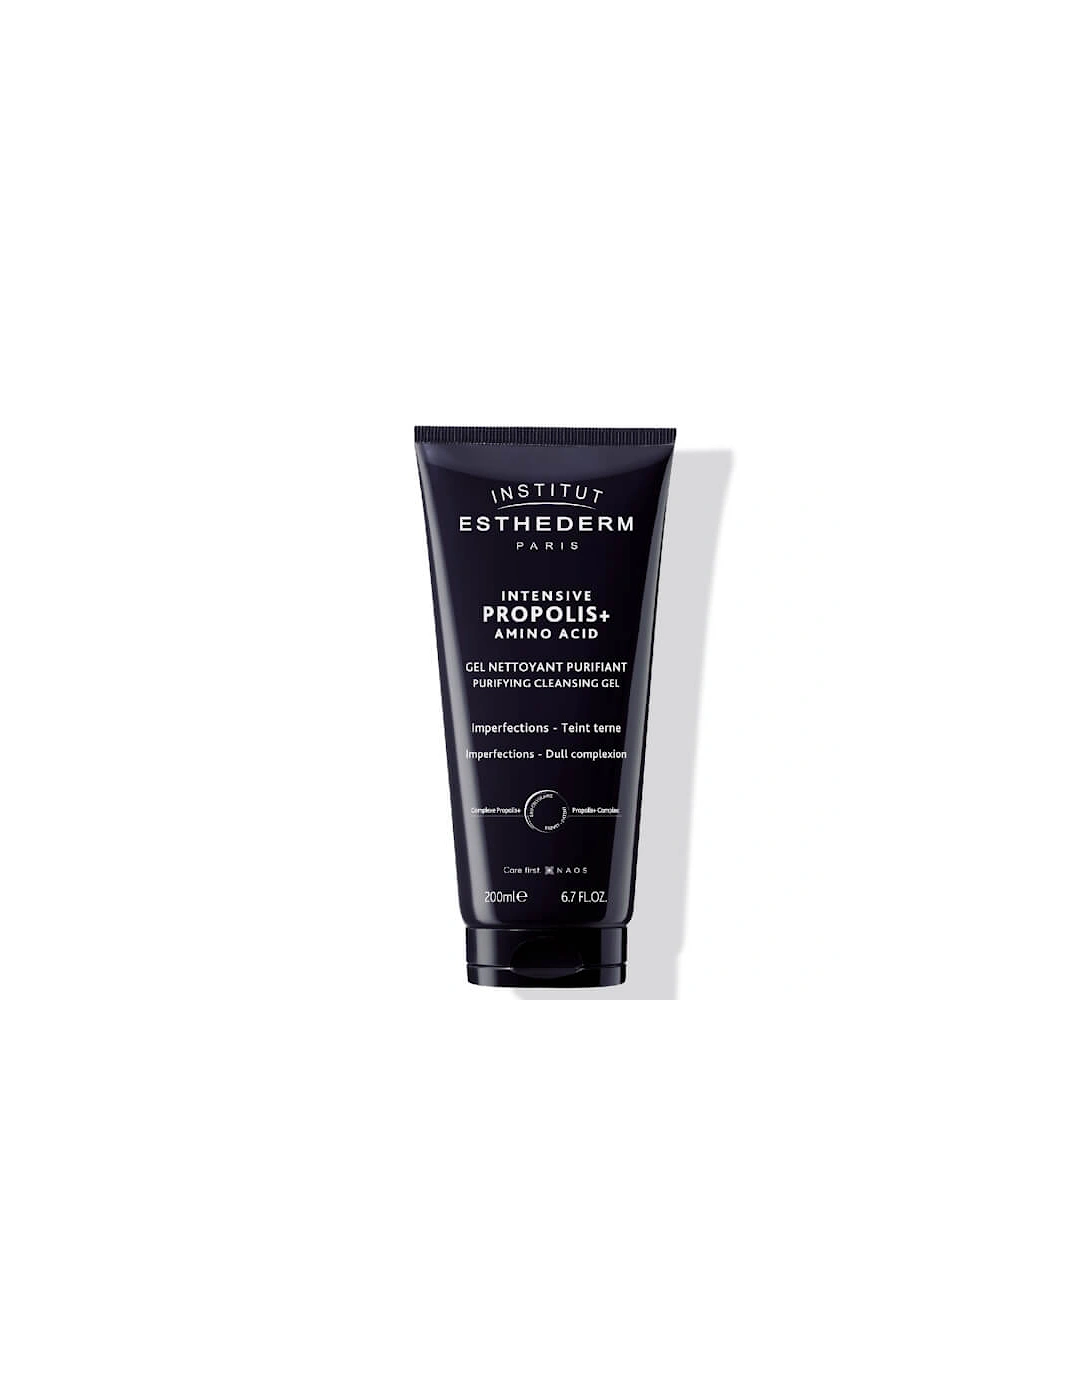 Intensive Propolis and Amino Acids Purifying Cleansing Face Gel 200ml, 2 of 1